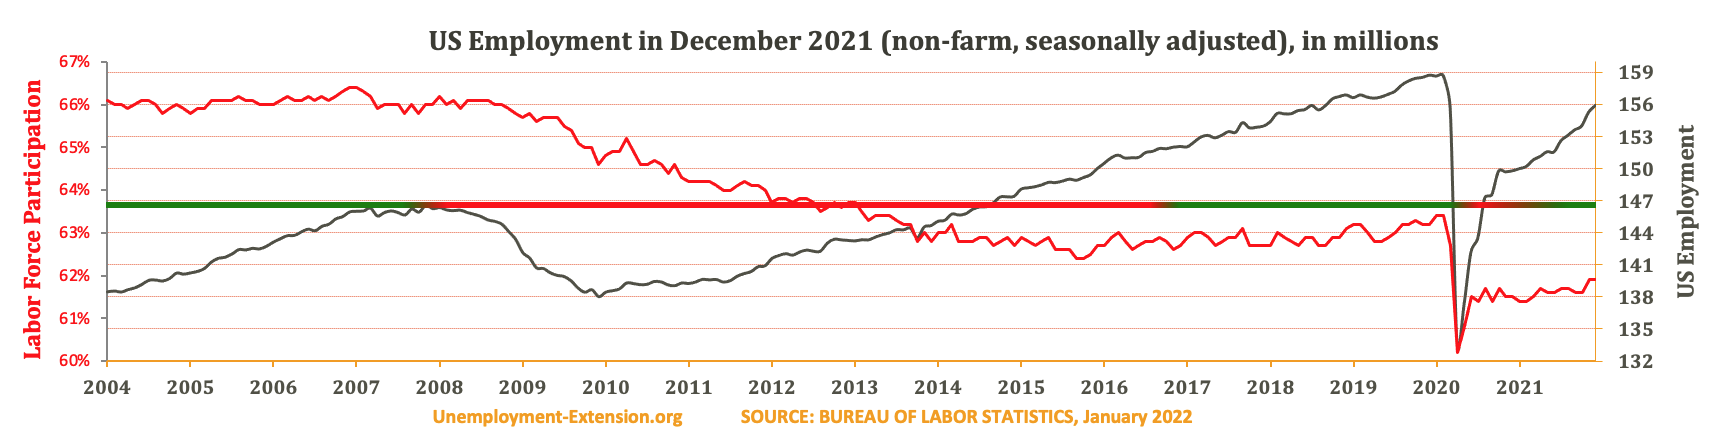 Total US Employment (non-farm, seasonally adjusted) in December 2021. US economy has lost approximately 10 million jobs in comparison to pre-resession level.